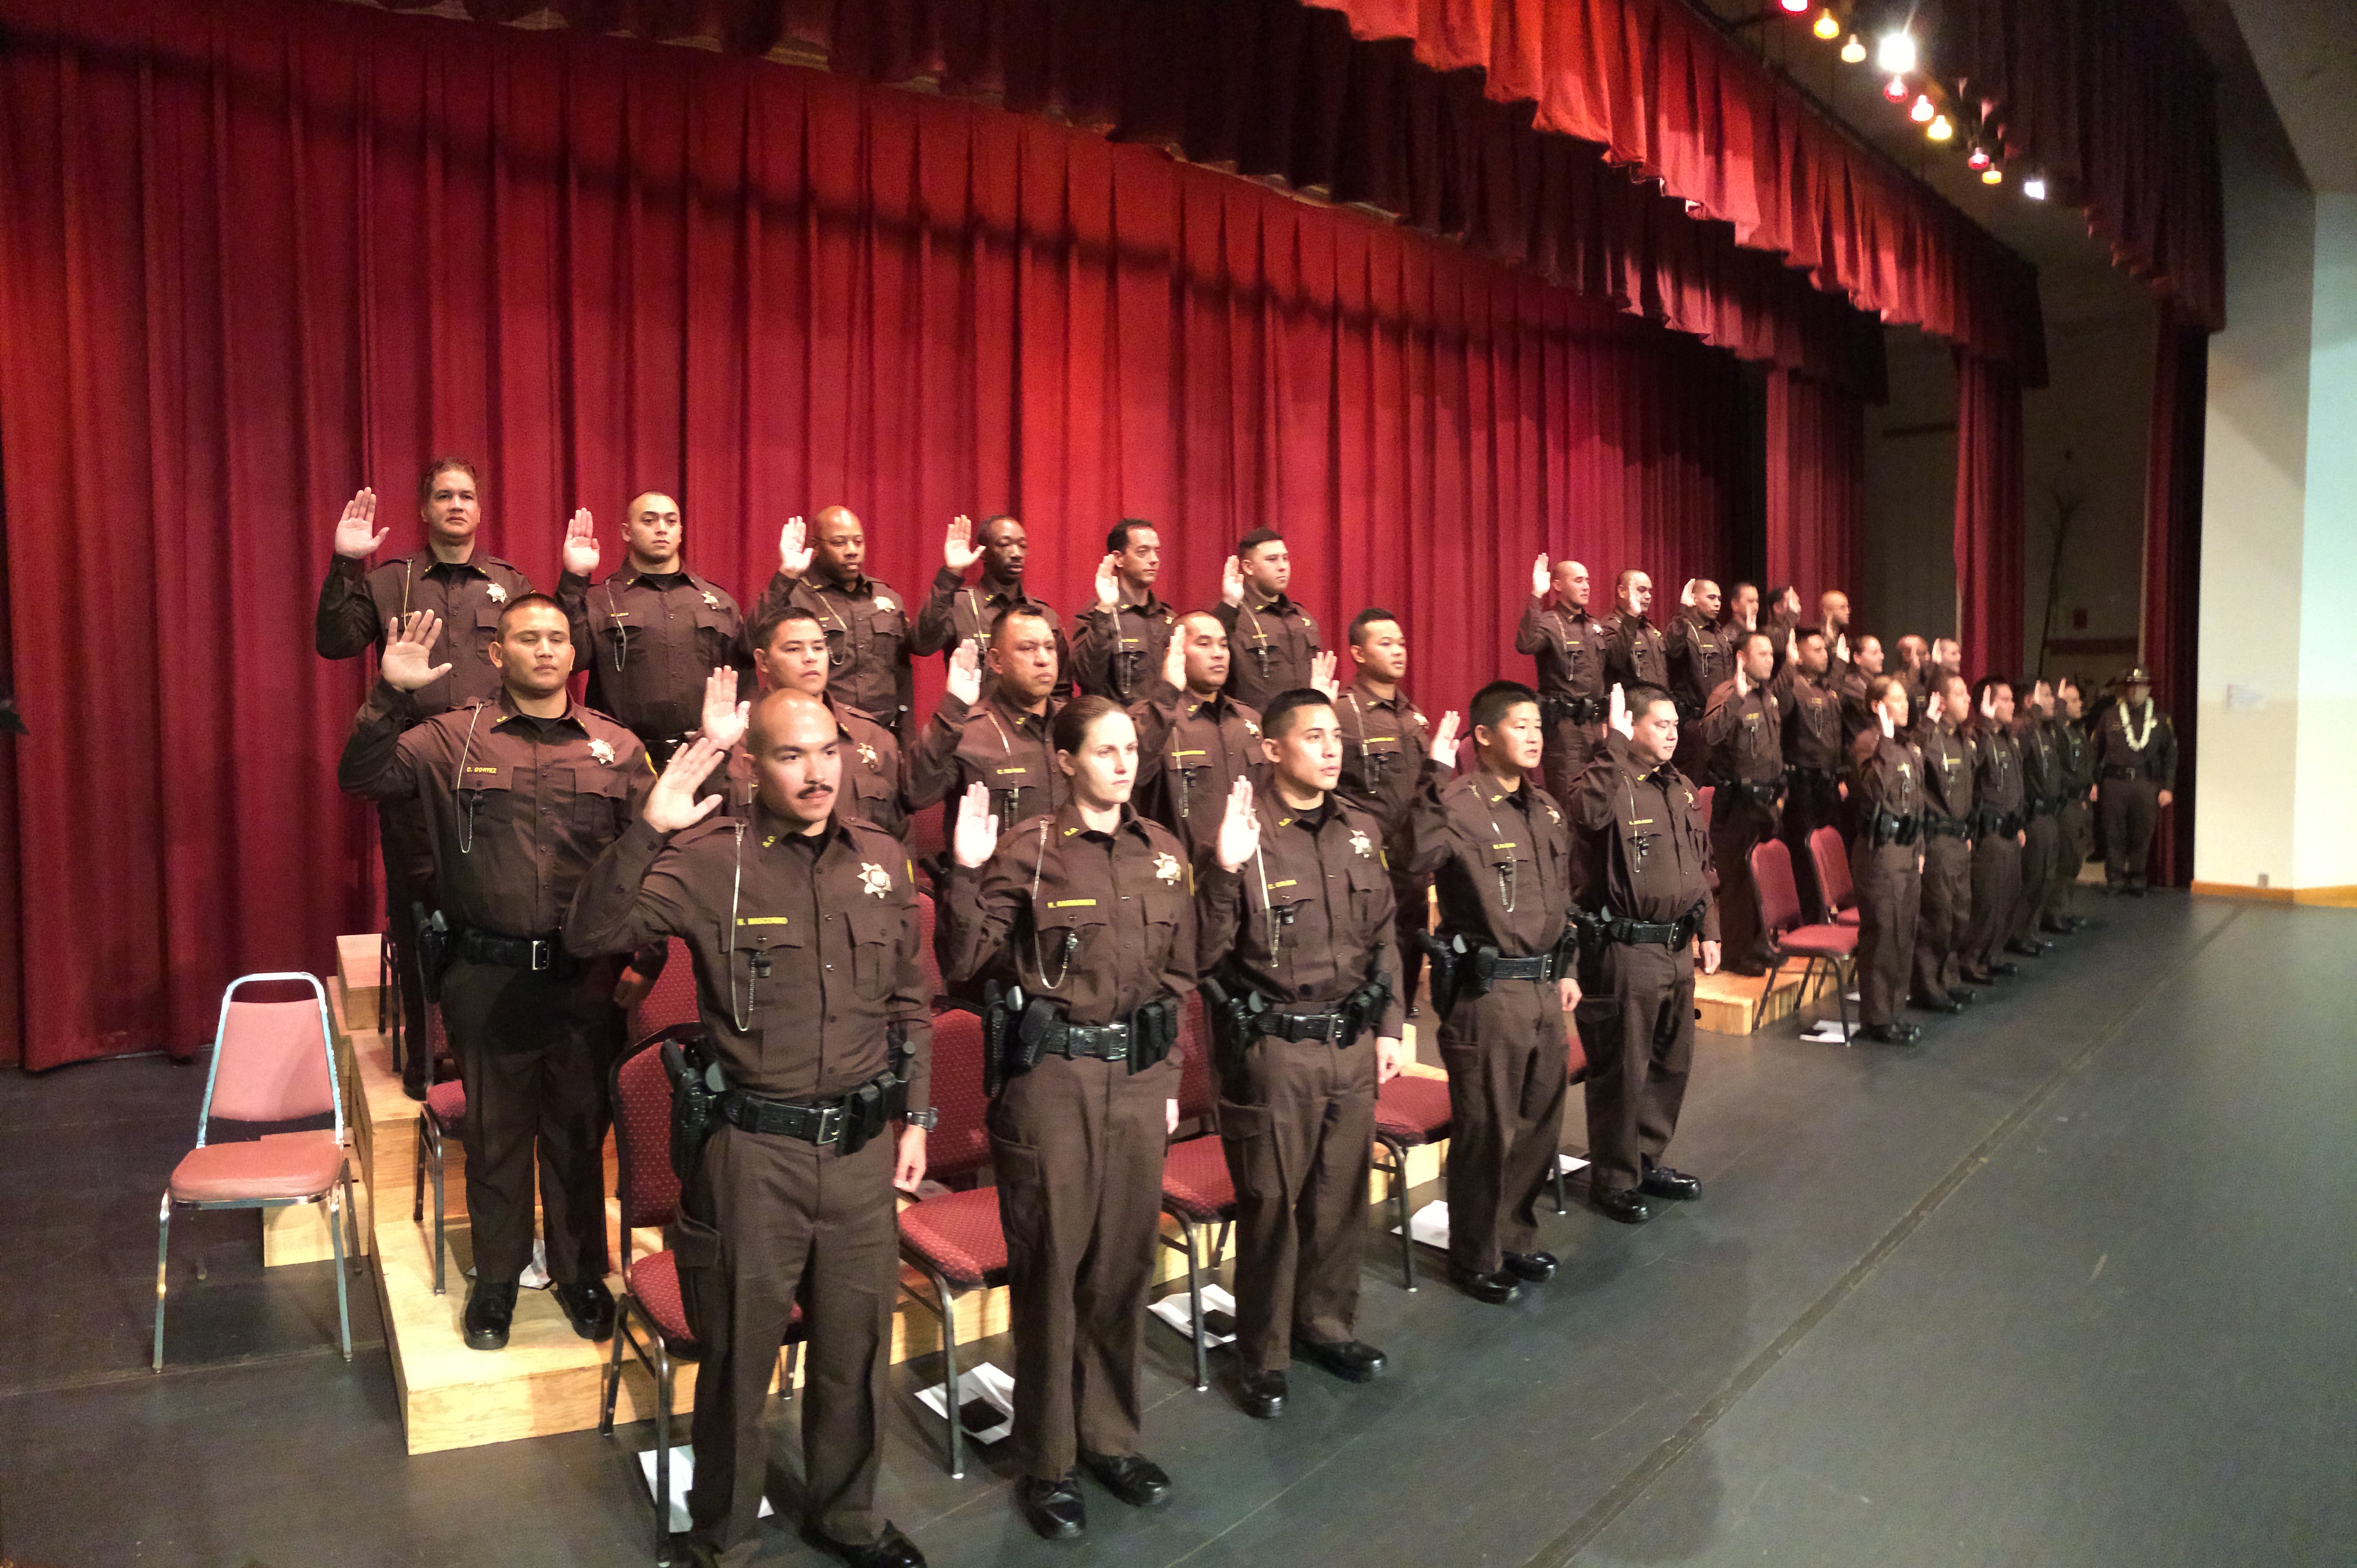 32 new deputies were added to the Sheriff Division and will be assigned to positions across the state.